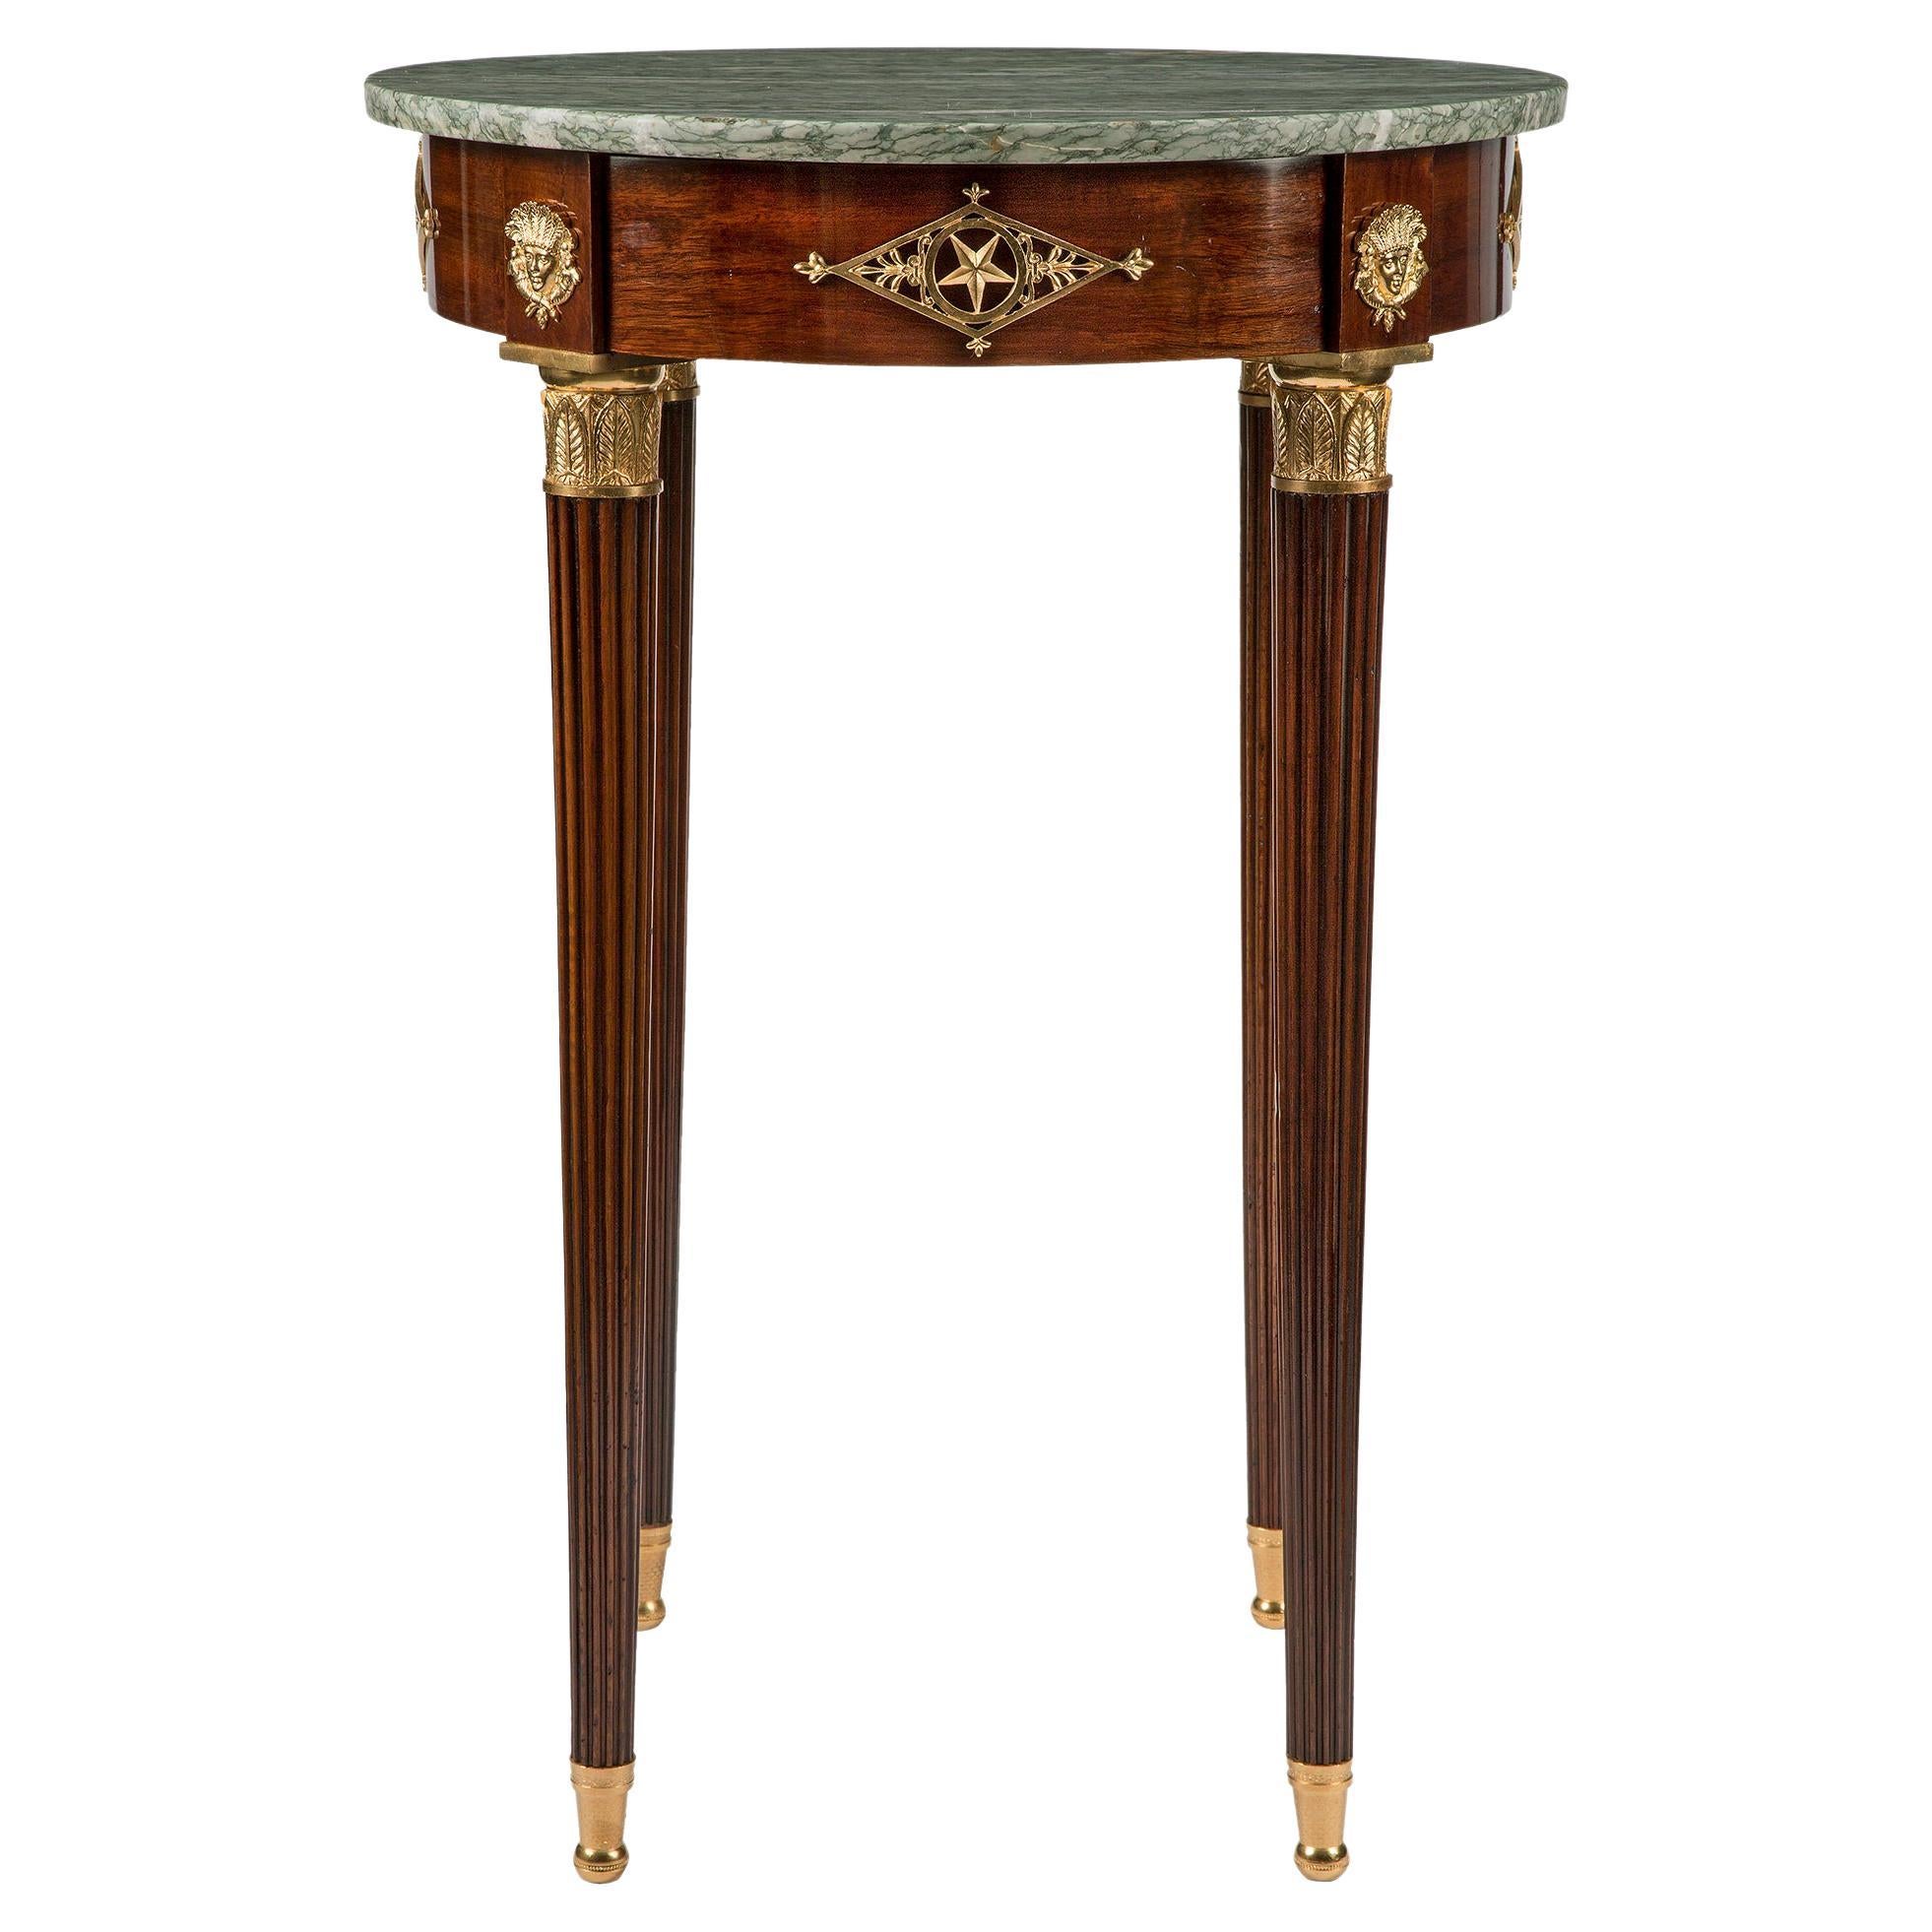 French 19th Century Louis XVI Style Mahogany and Ormolu Side Table